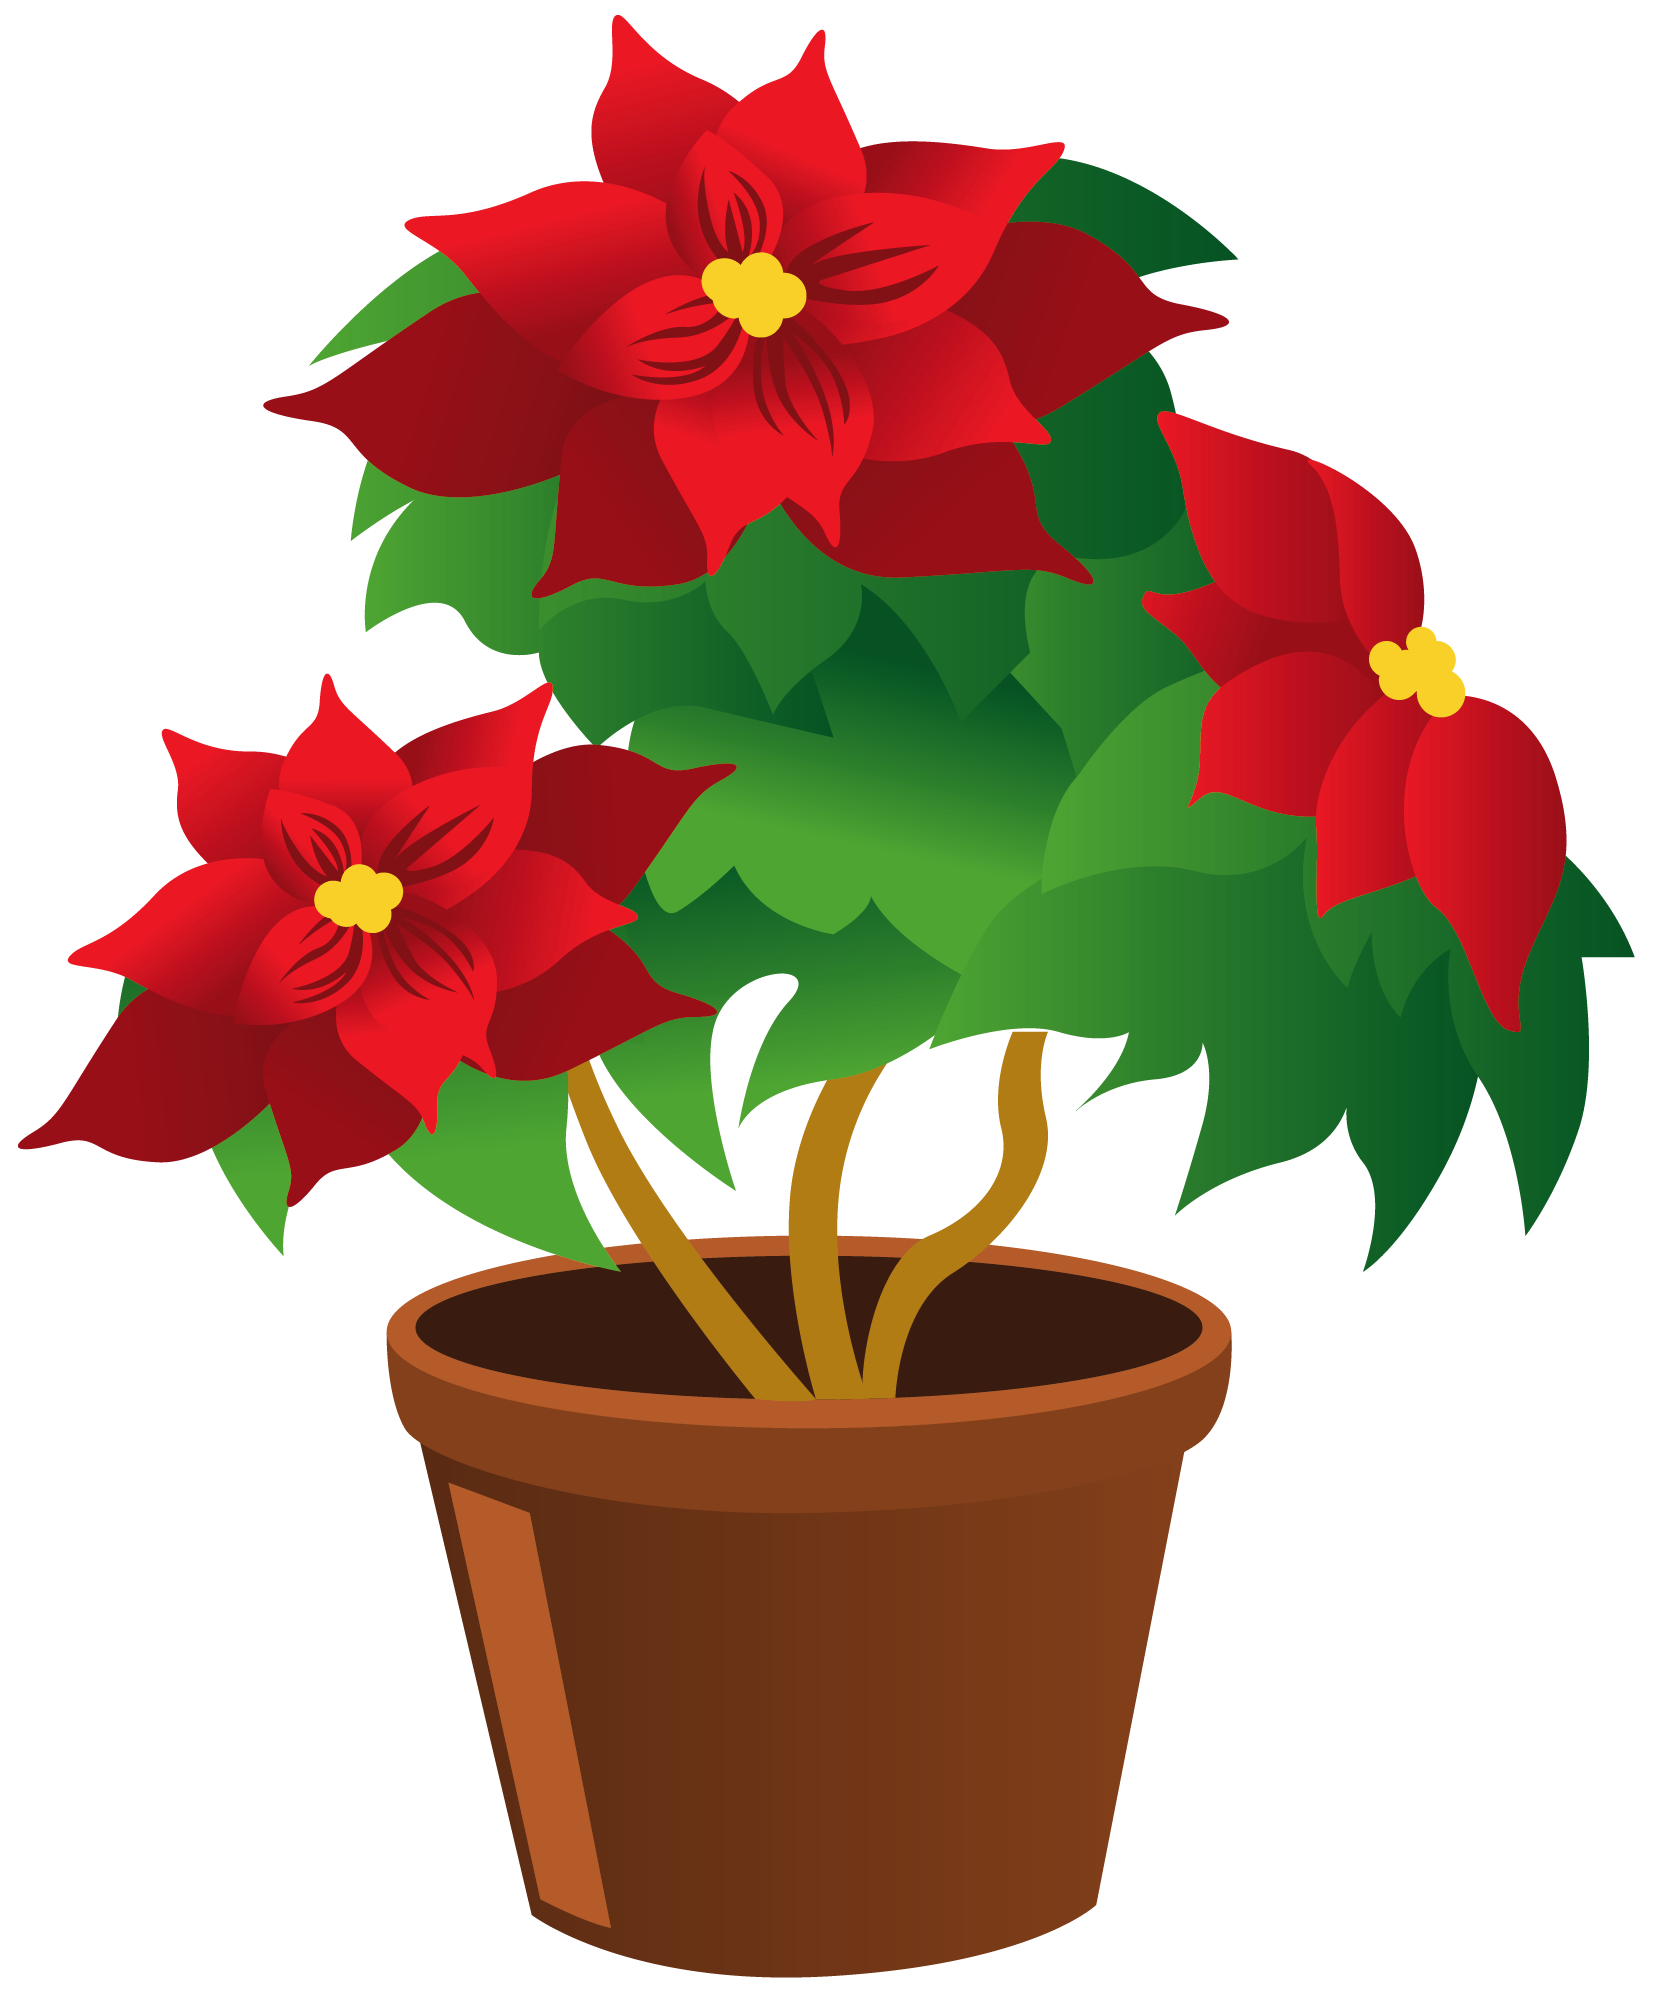 Pot Plant clipart #7, Download drawings